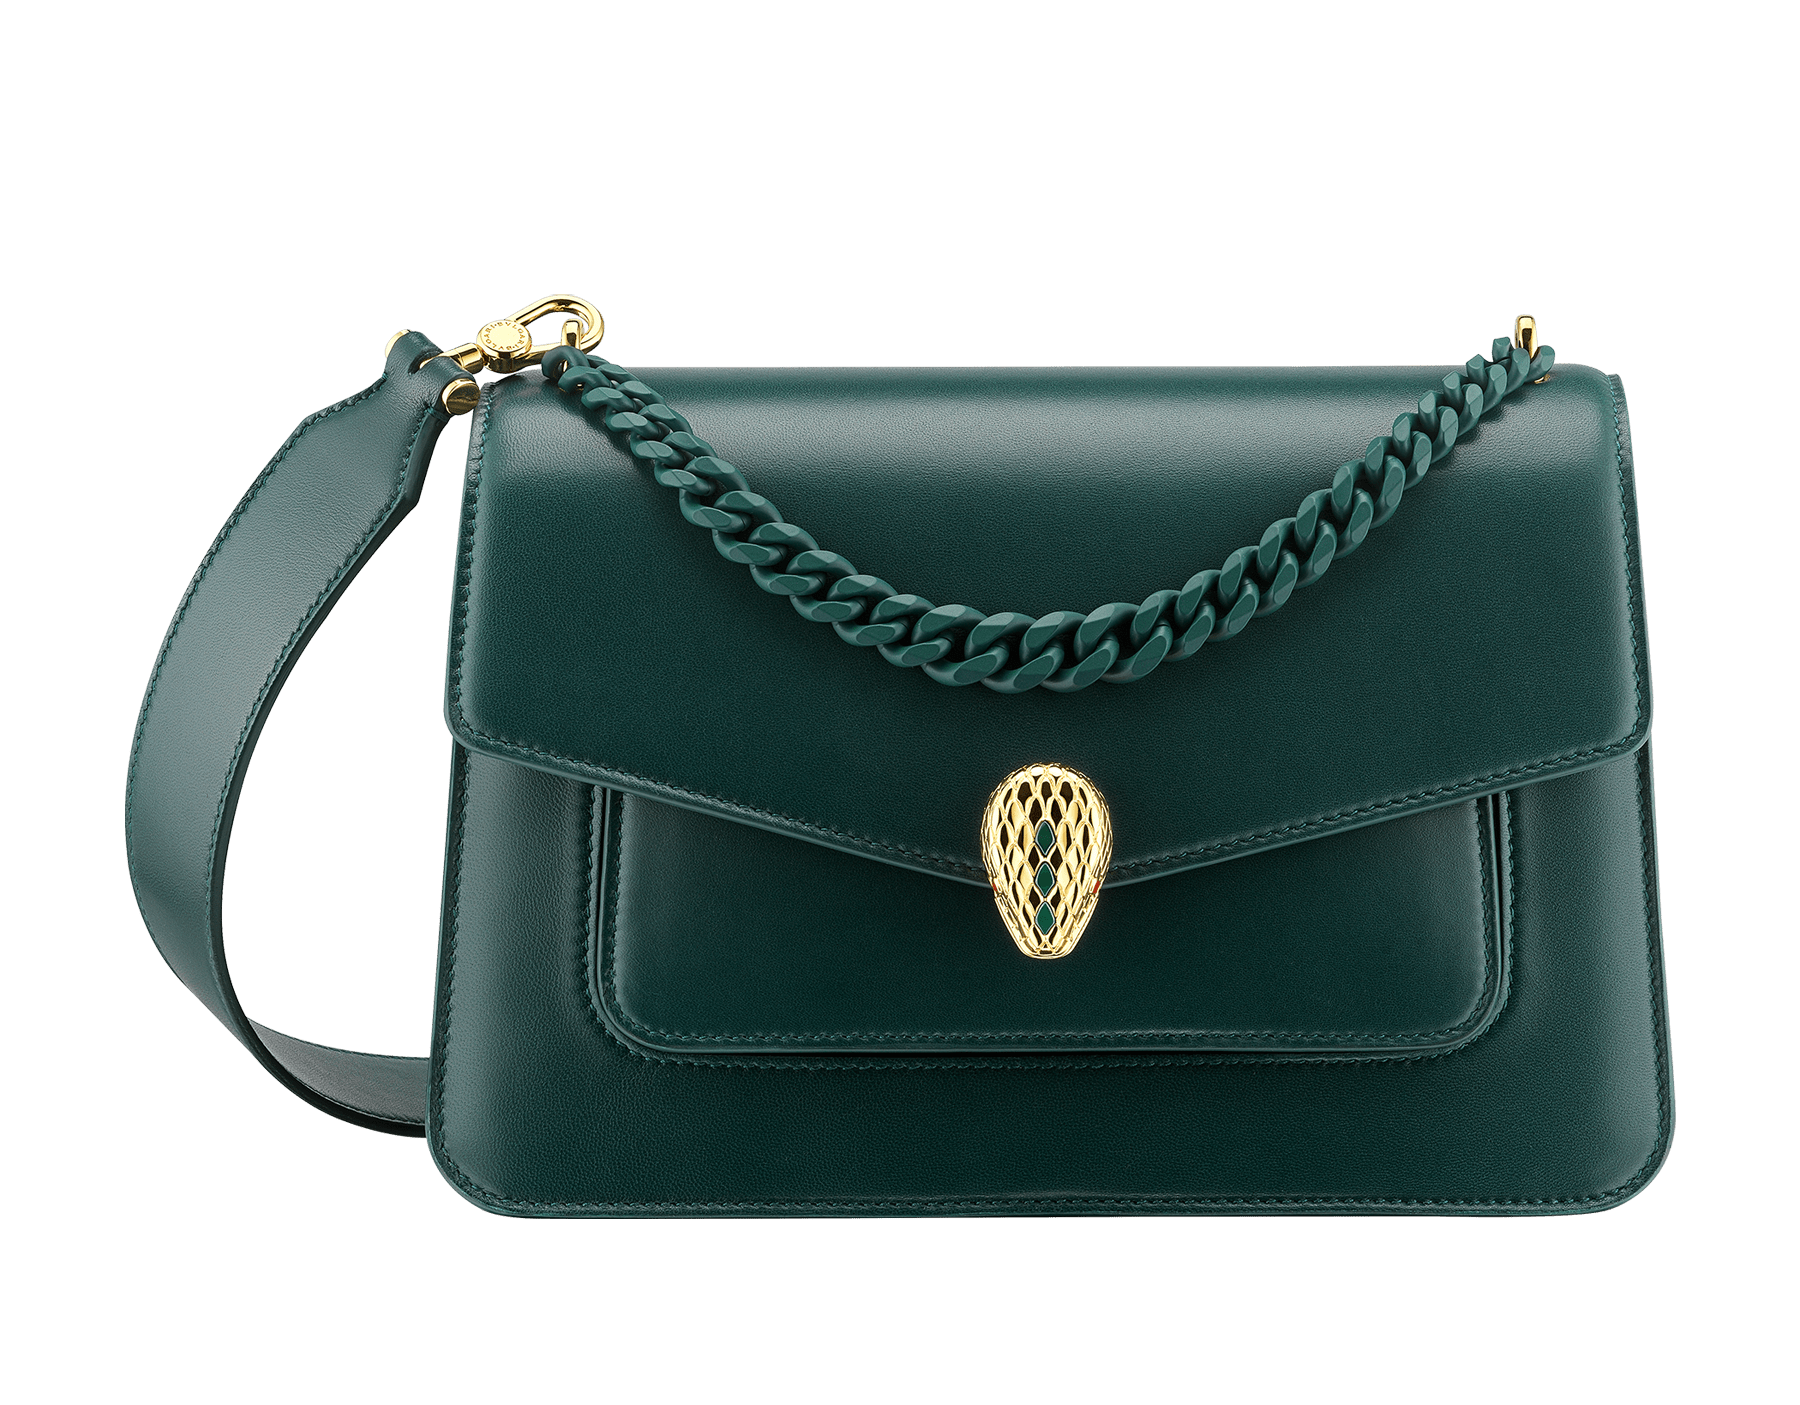 "Serpenti Forever" maxi chain crossbody bag in Ivory Opal white nappa leather, with an Deep Garnet bordeaux nappa leather internal lining. New Serpenti head closure in gold-plated brass, finished with small grey mother-of-pearl scales in the middle, and red enamel eyes. 1138-MCNb image 1